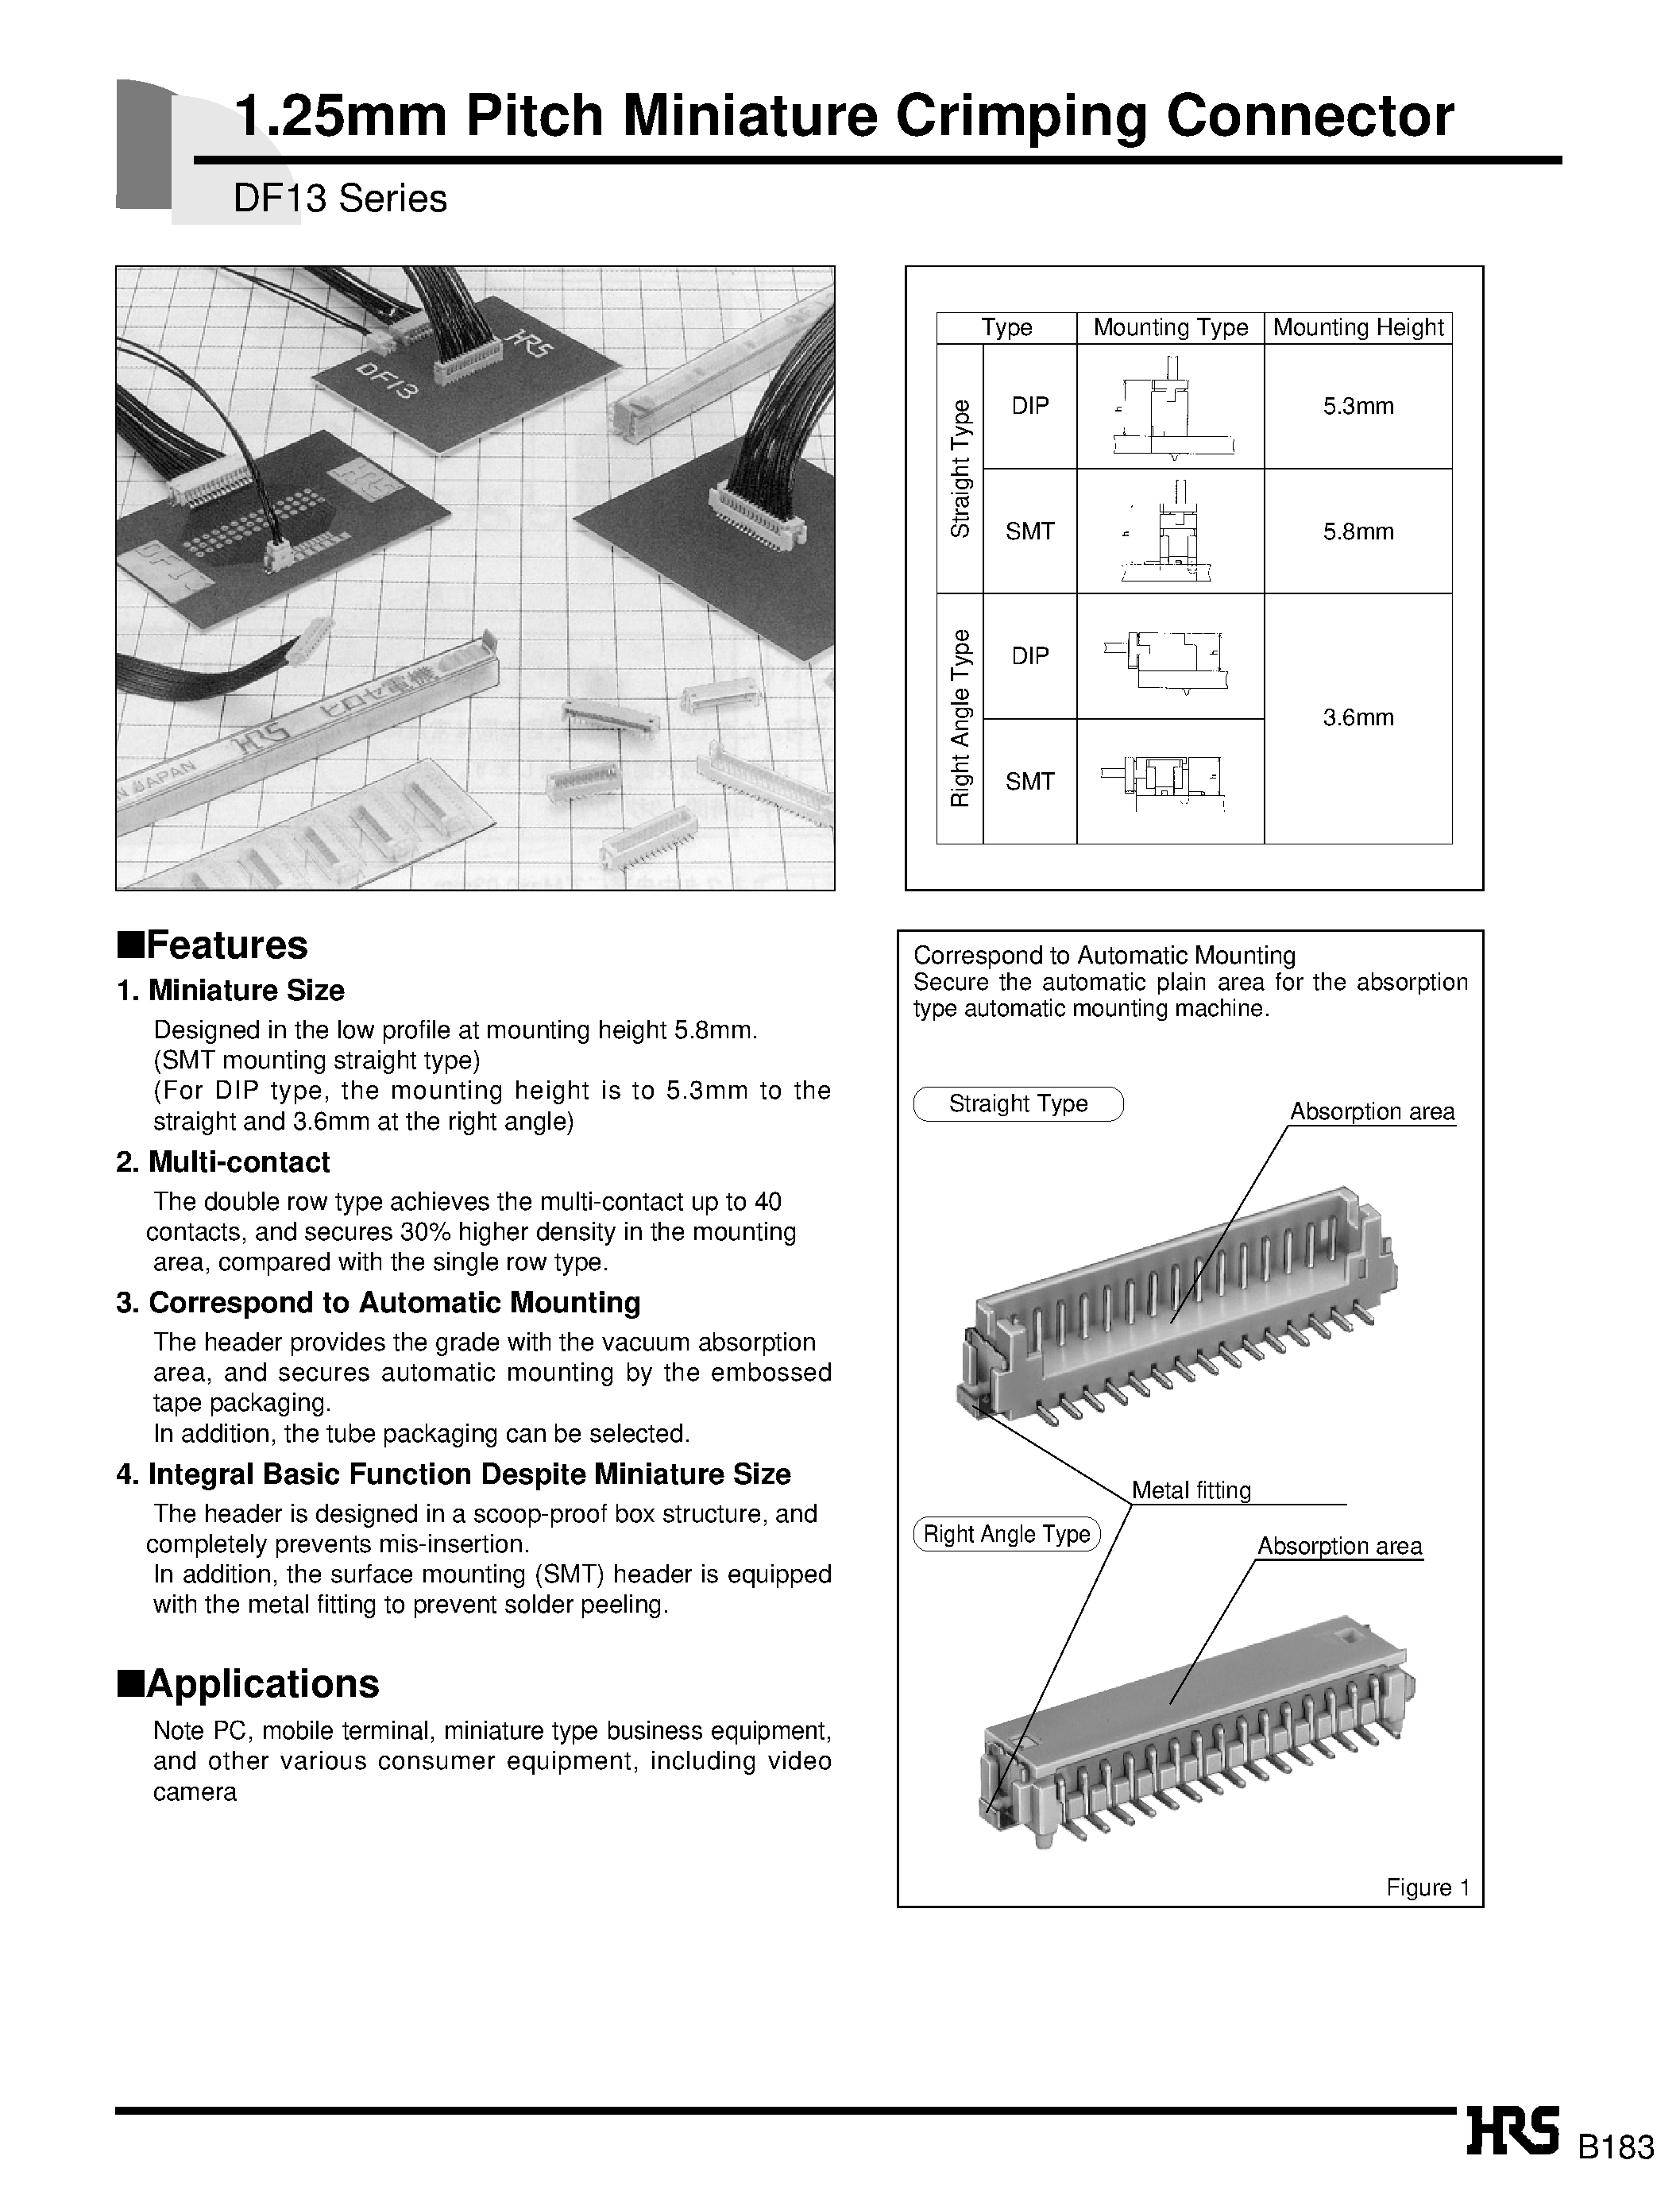 Datasheet DF13-10S-1.25V - 1.25mm Pitch Miniature Crimping Connector page 1